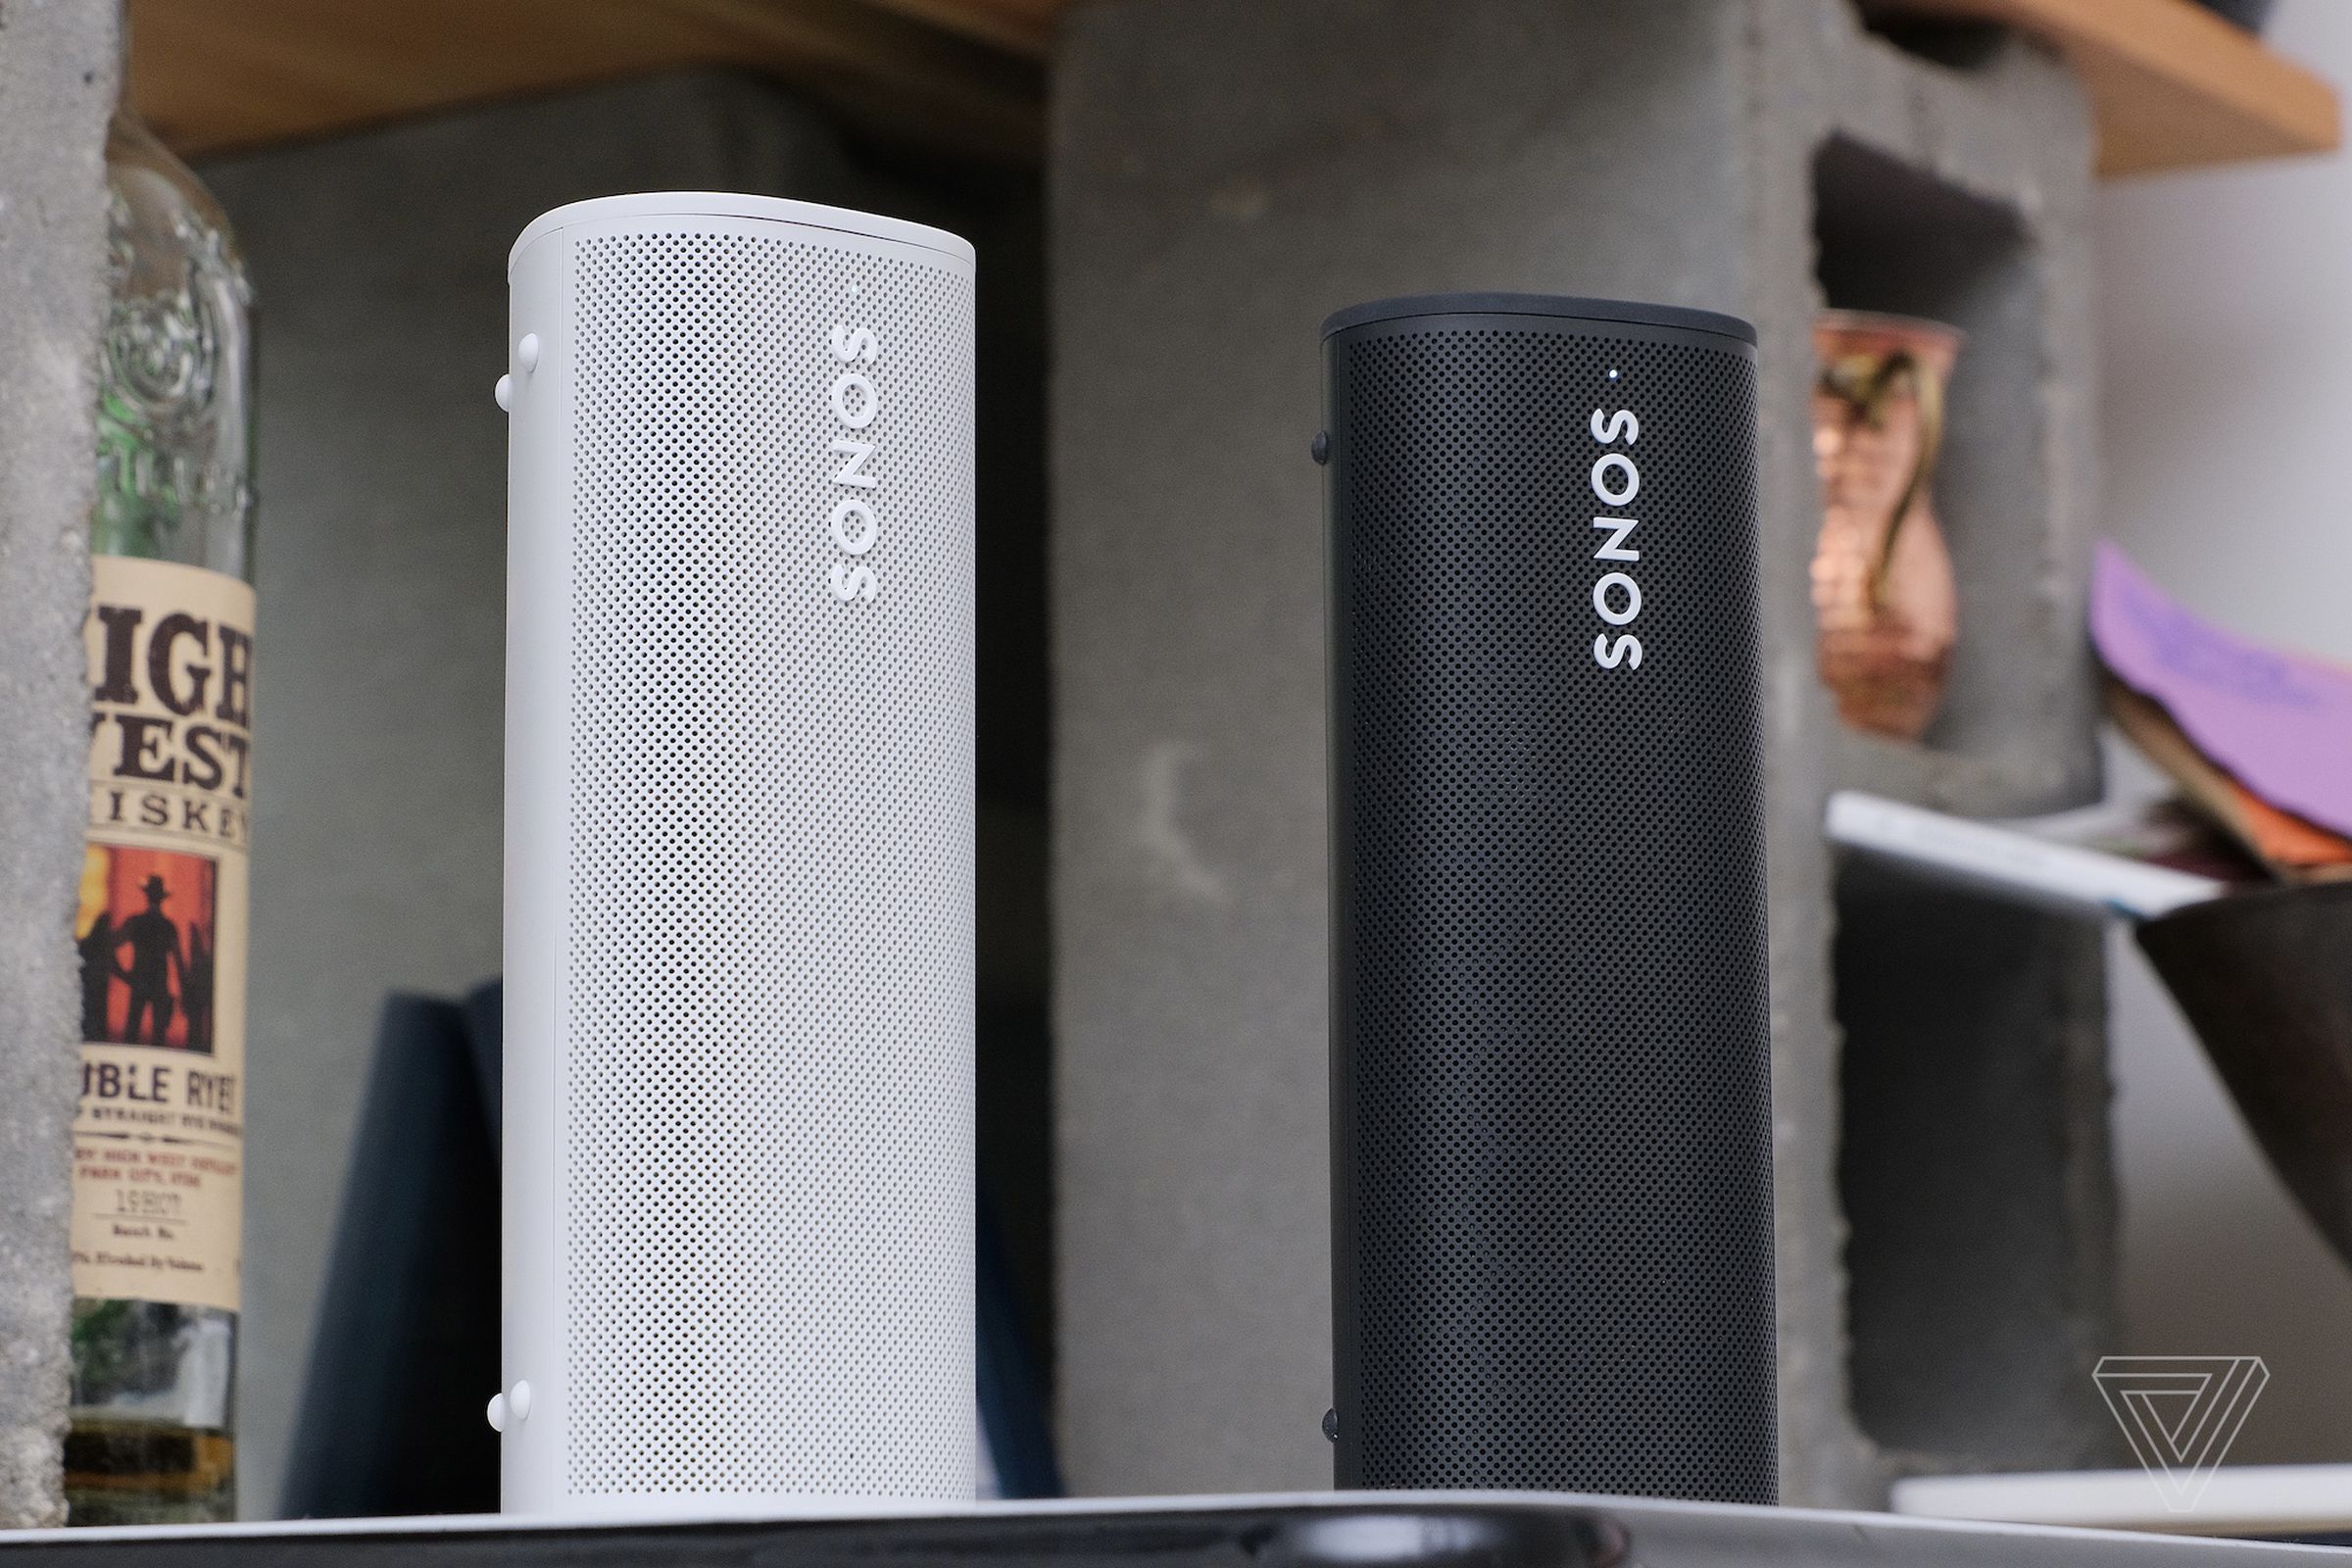 Two Roams paired together can produce an excellent stereo soundstage — but only on Wi-Fi.